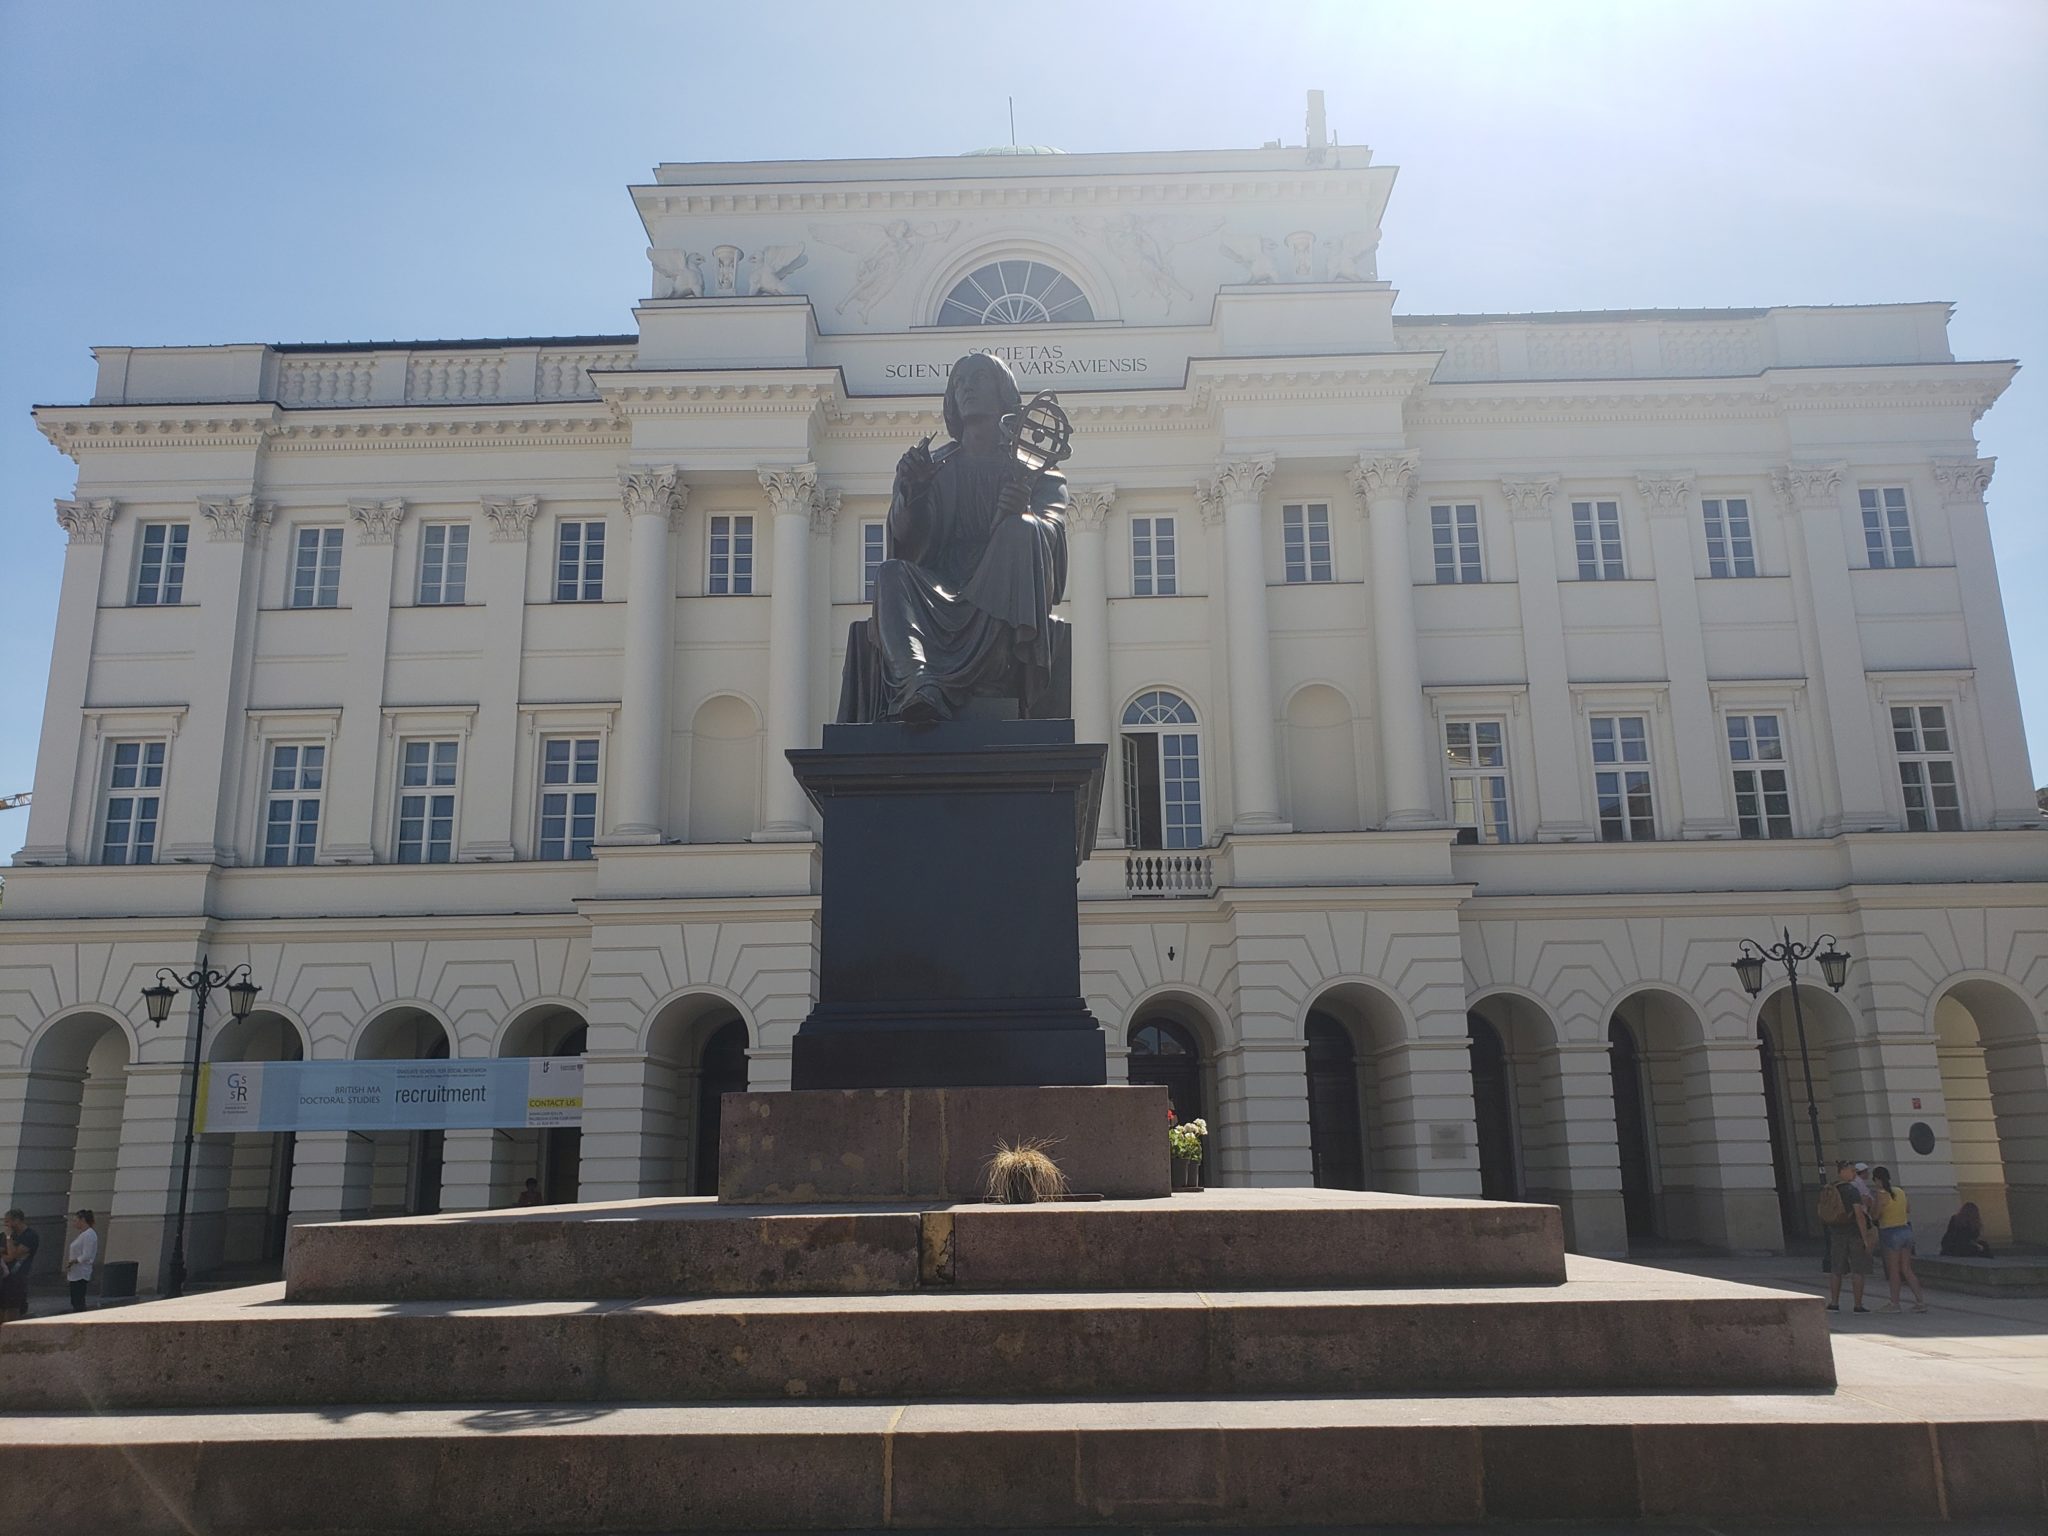 a statue of a man sitting on a pedestal in front of a large white building